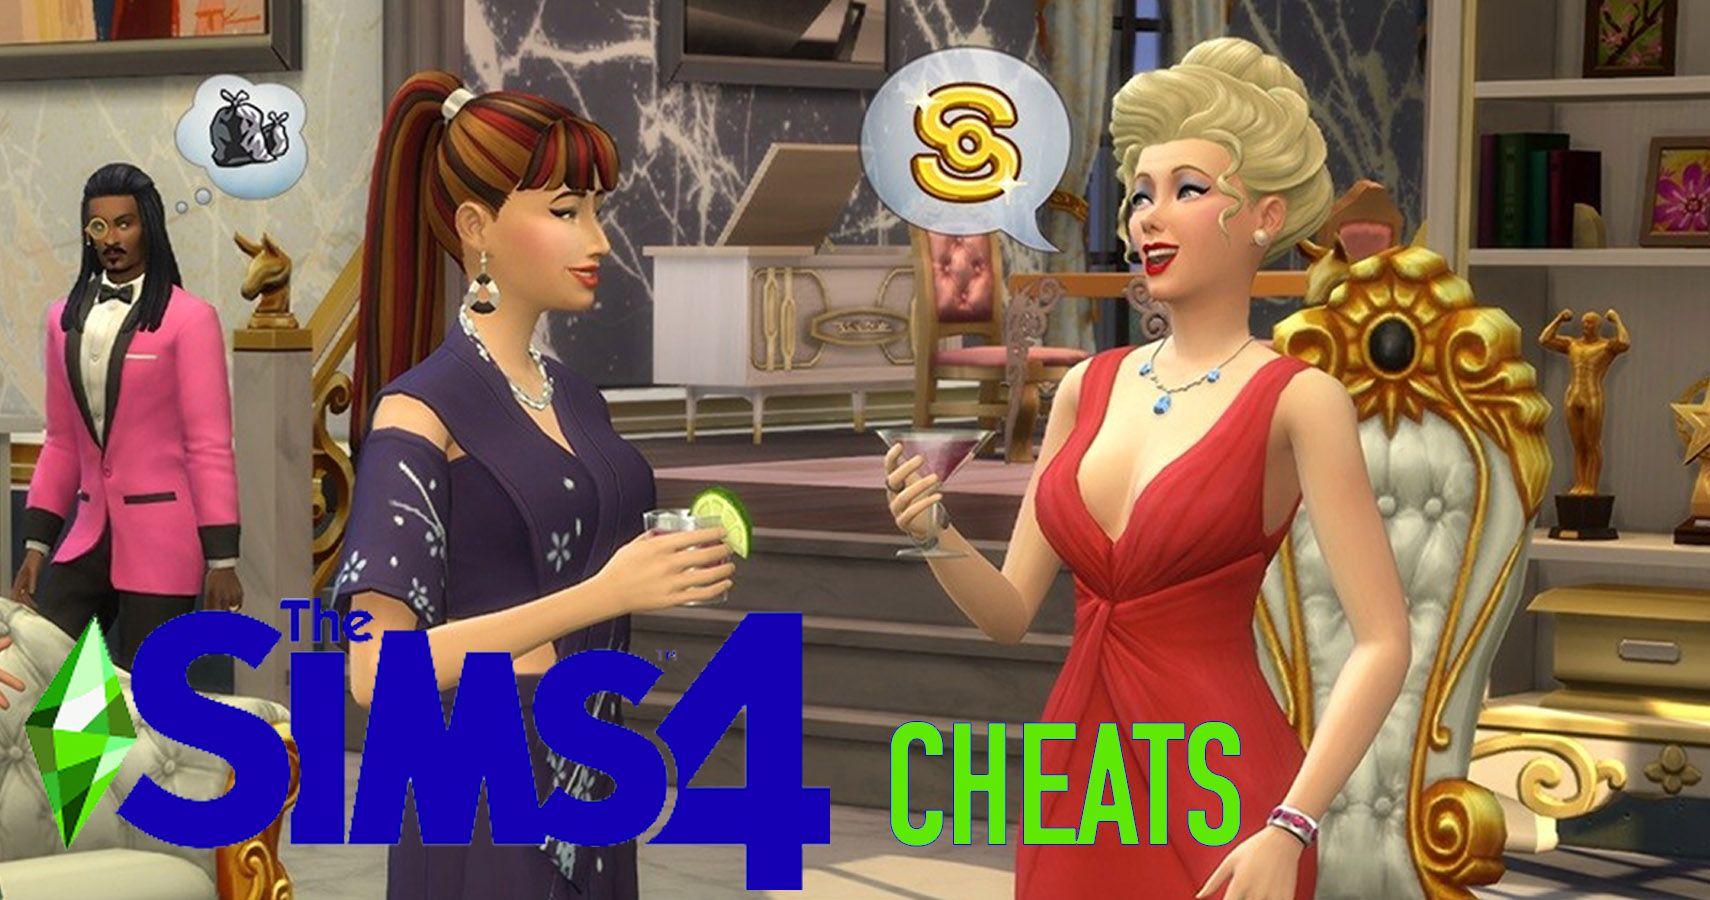 cheat promotion sims 4